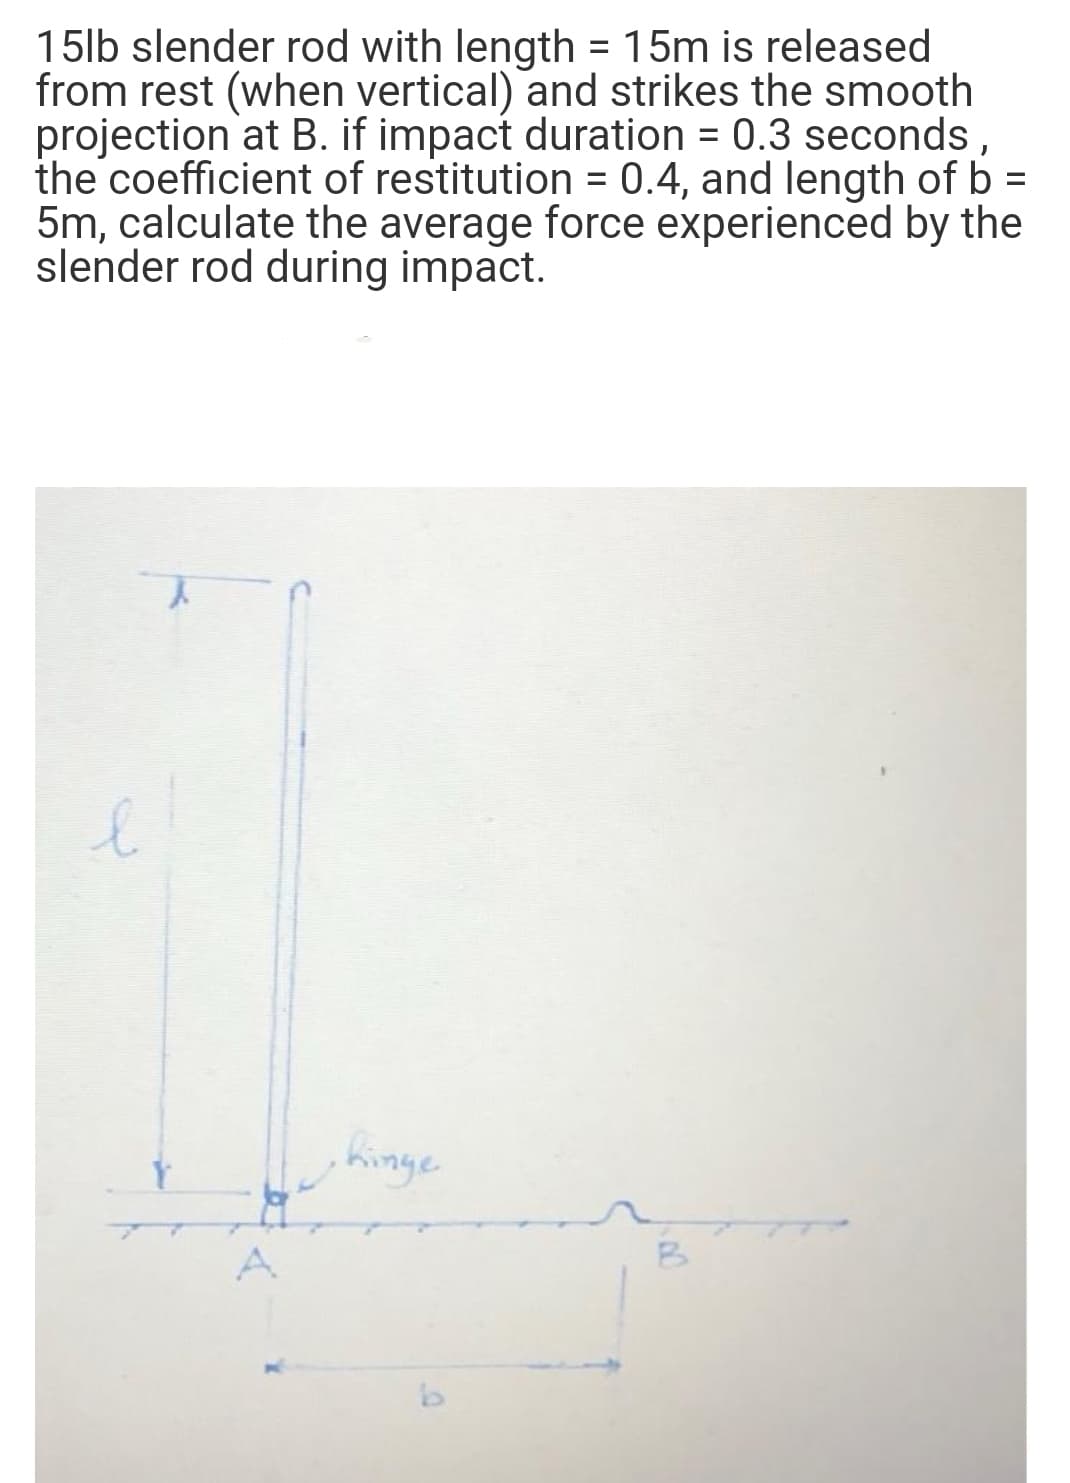 15lb slender rod with length = 15m is released
from rest (when vertical) and strikes the smooth
projection at B. if impact duration = 0.3 seconds
the coefficient of restitution = 0.4, and length of b =
5m, calculate the average force experienced by the
slender rod during impact.
%3D
%D
%3D
hinge
B.
